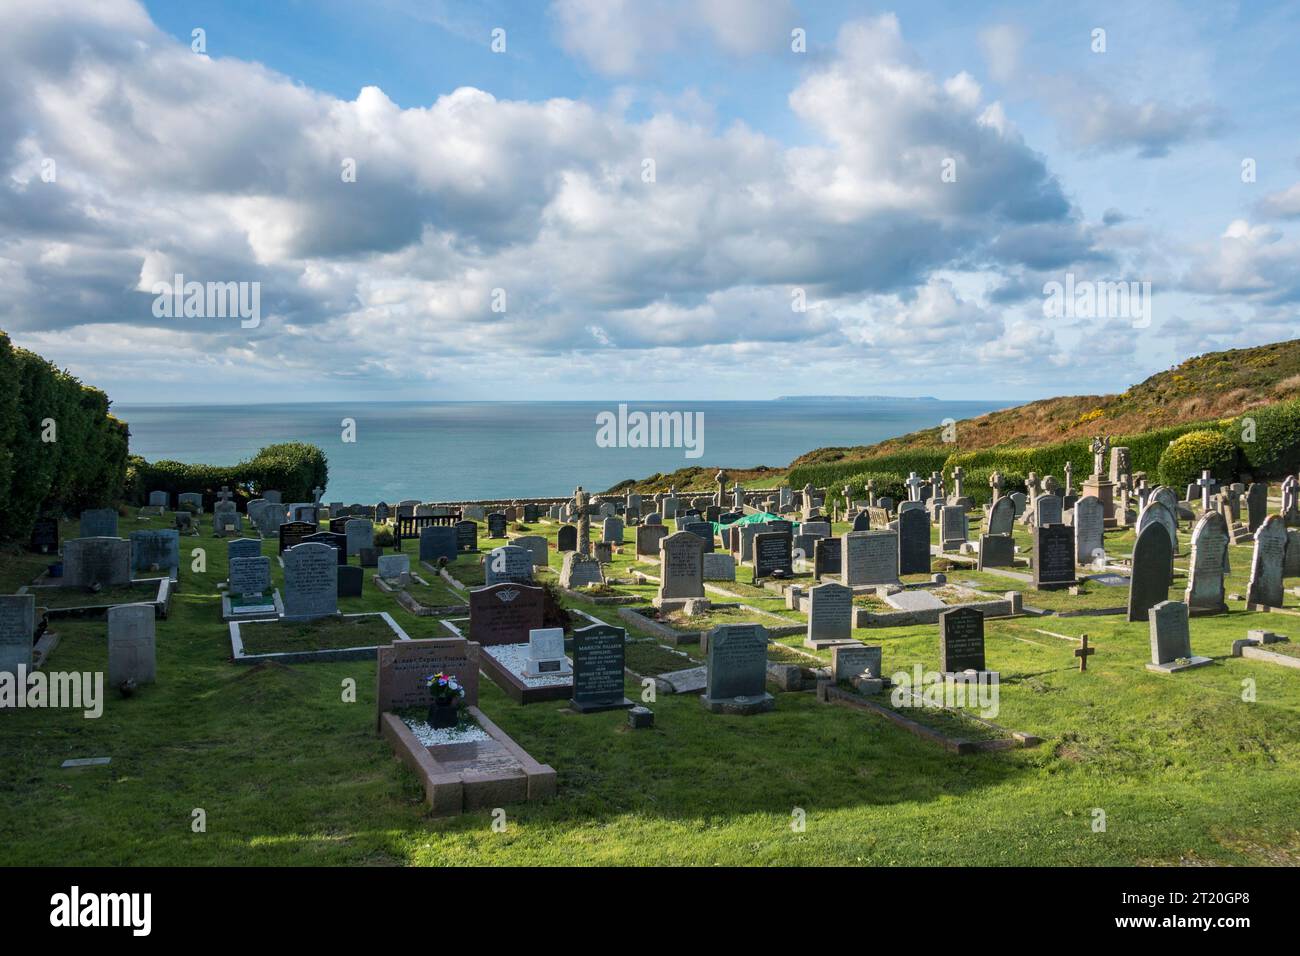 The peaceful clifftop cemetery at Morte Point, near the remote North Devon village of Mortehoe, overlooking the sea Stock Photo